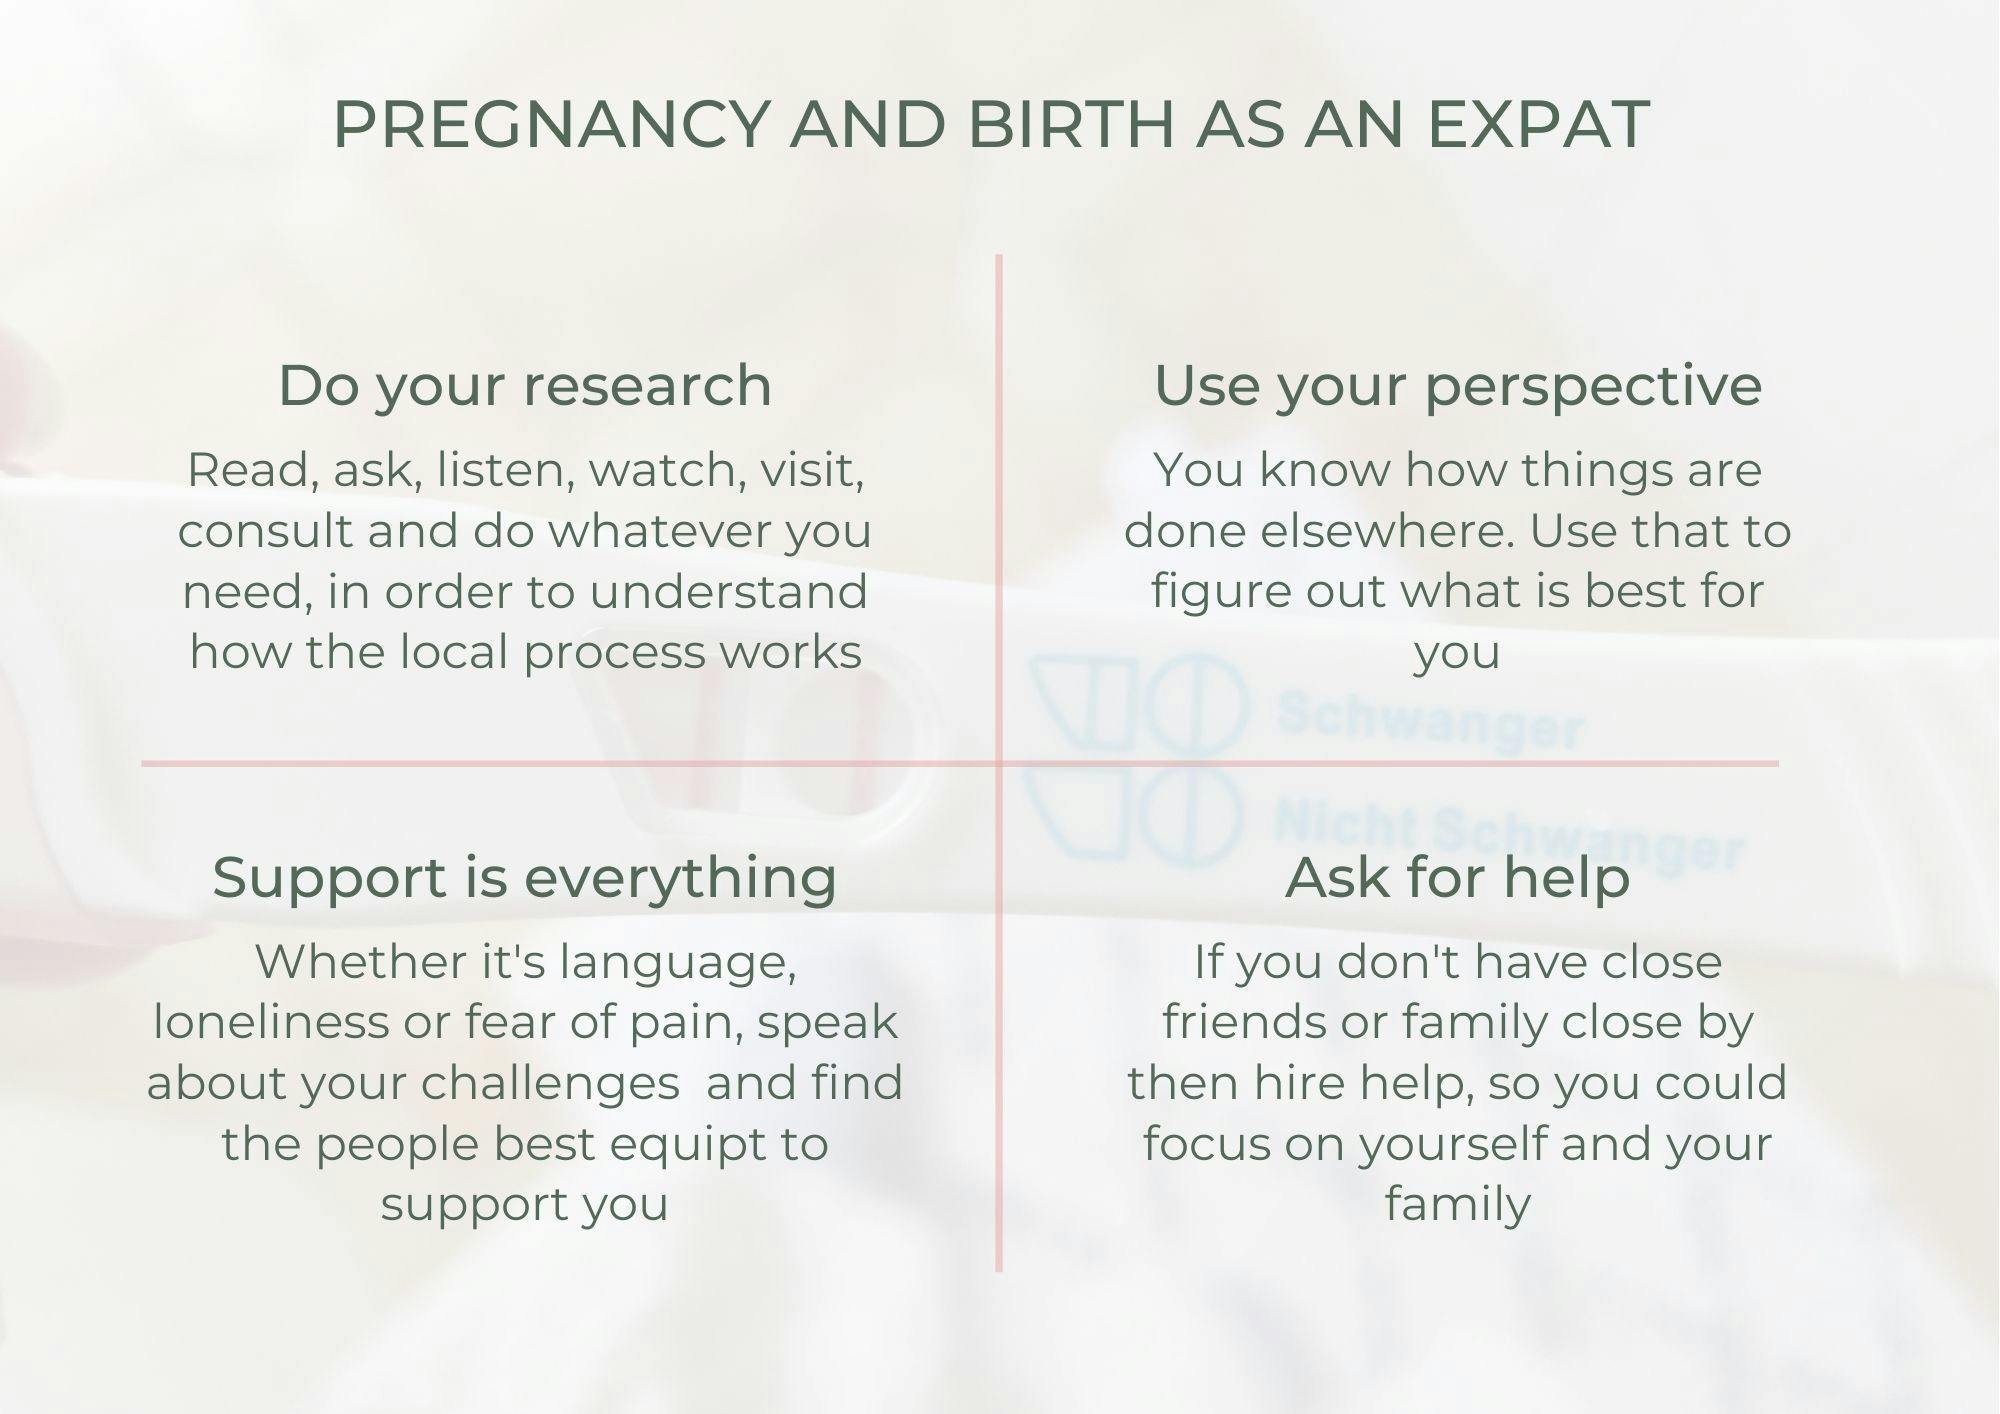 Pregnancy and birth as an expat tips